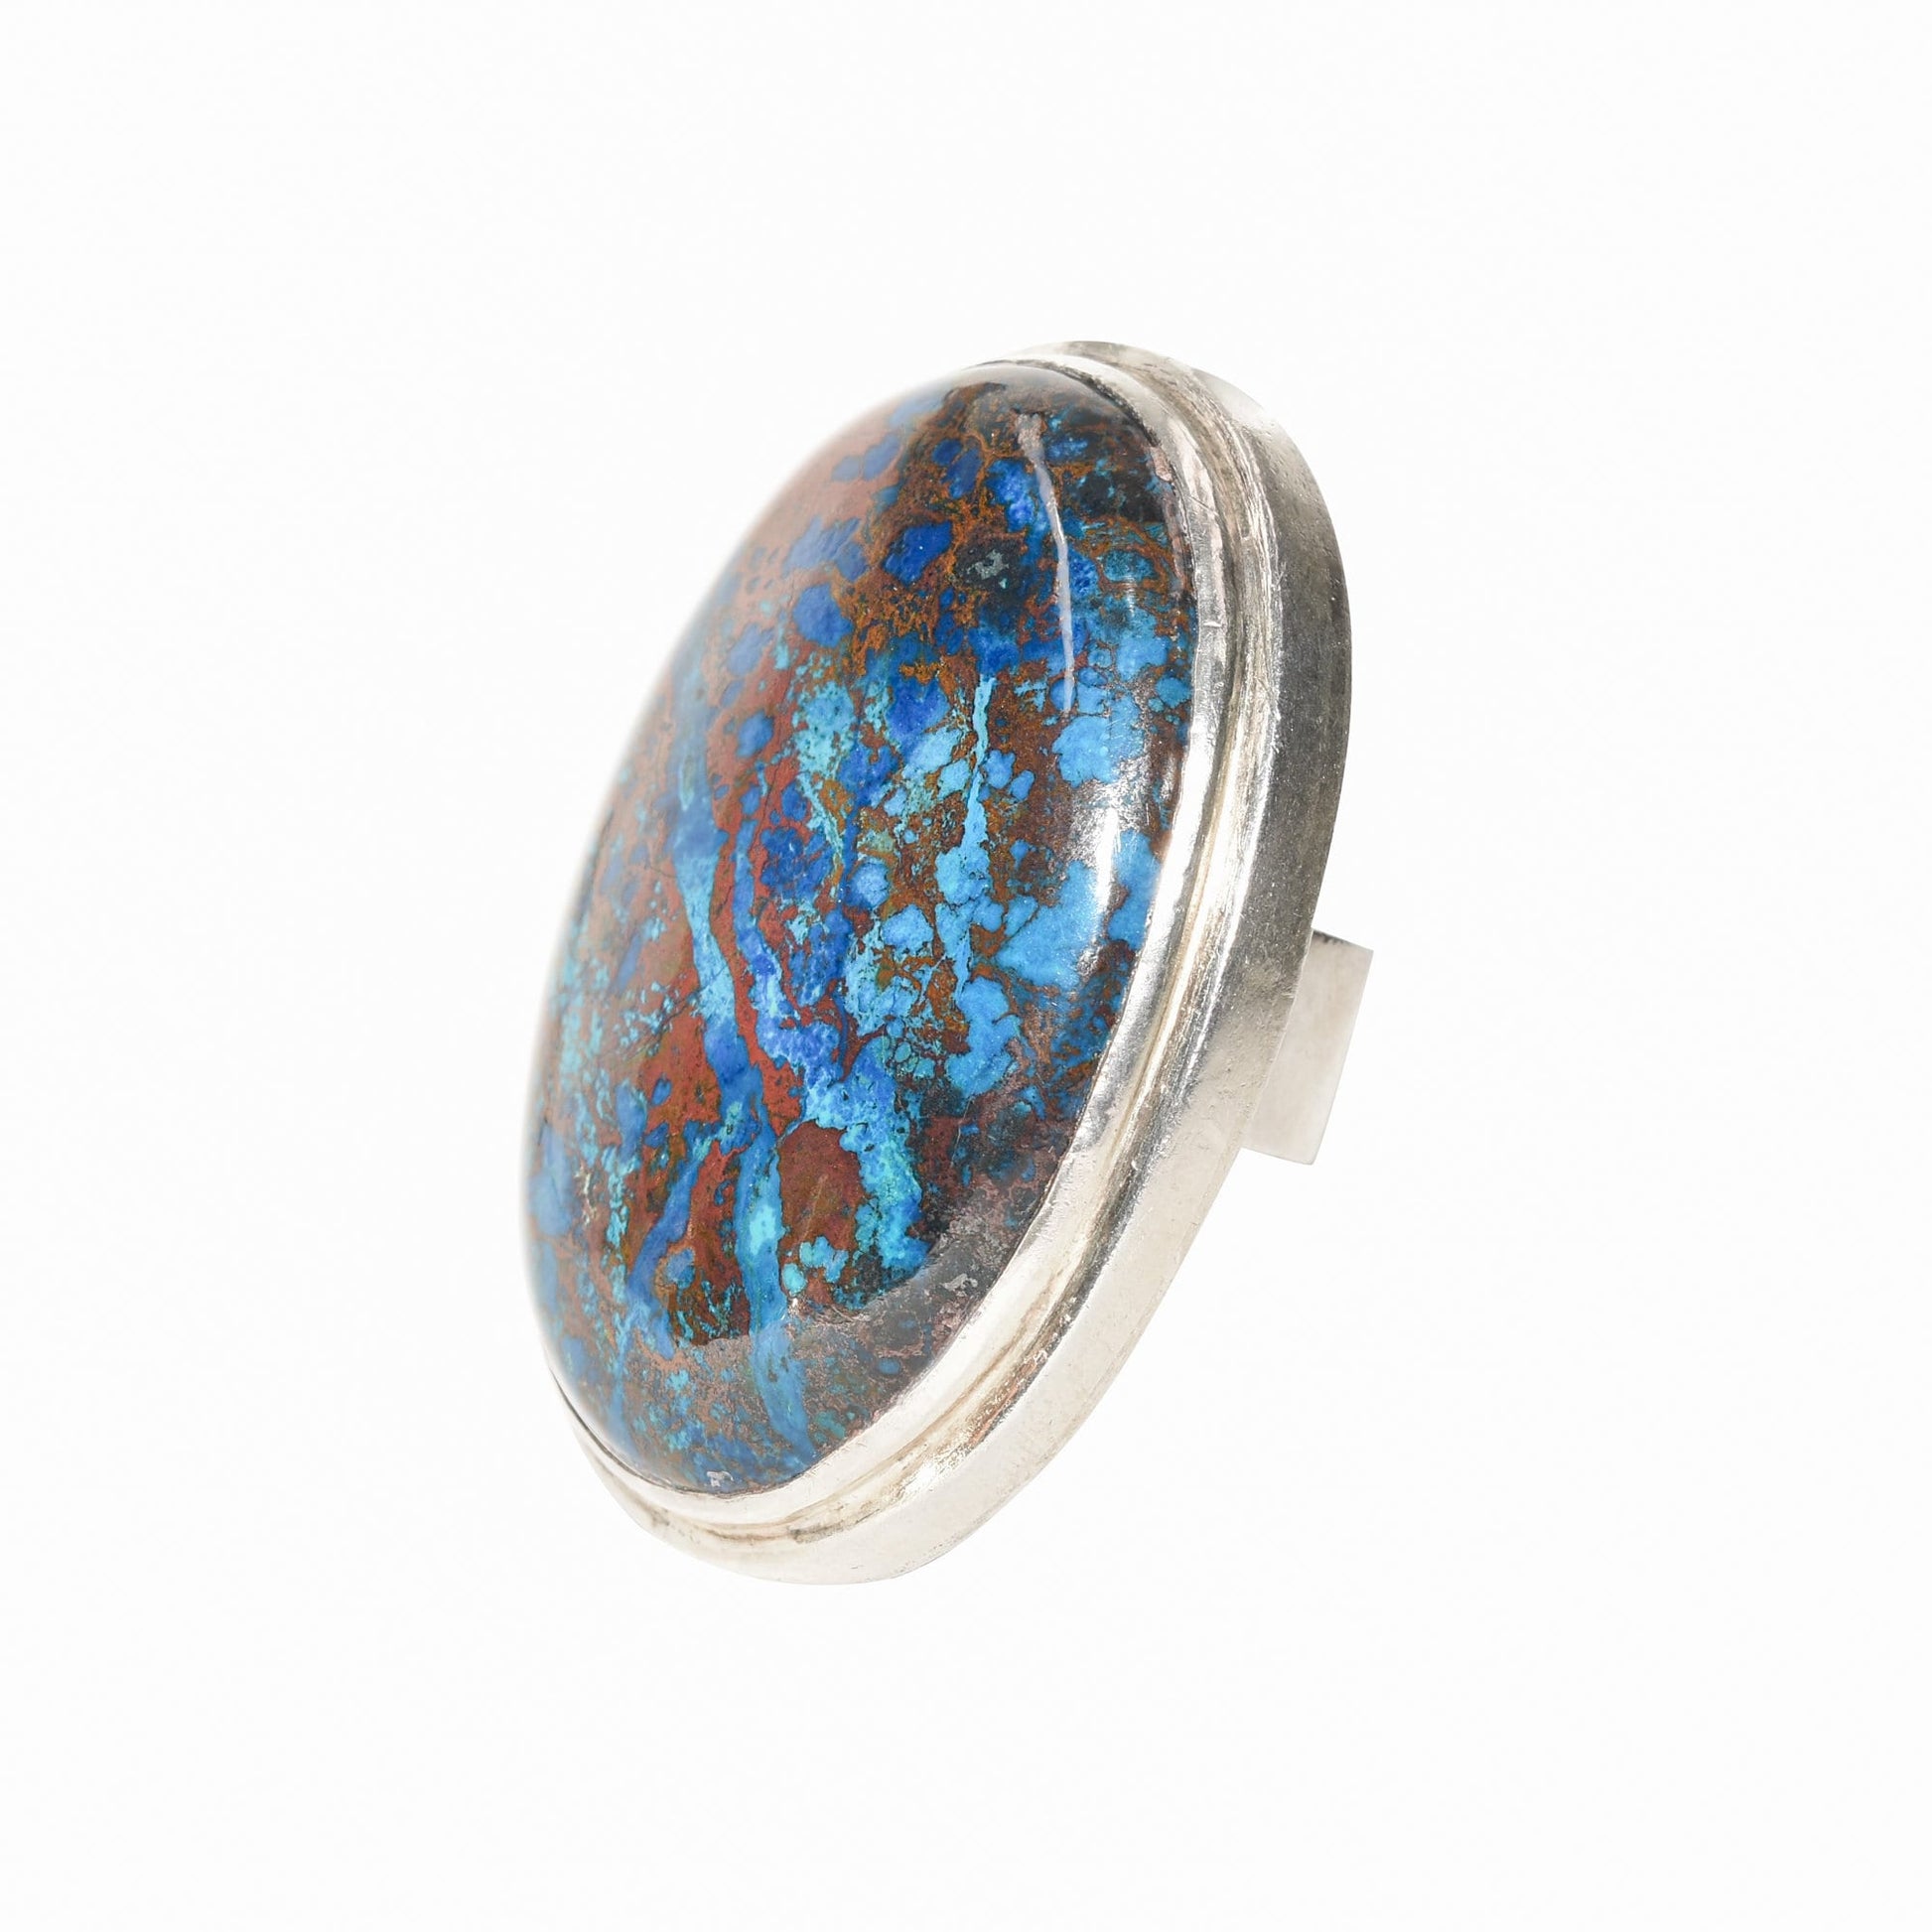 Sterling silver cabochon statement ring with chunky blue matrix gemstone, size 7 3/4 US on white background.